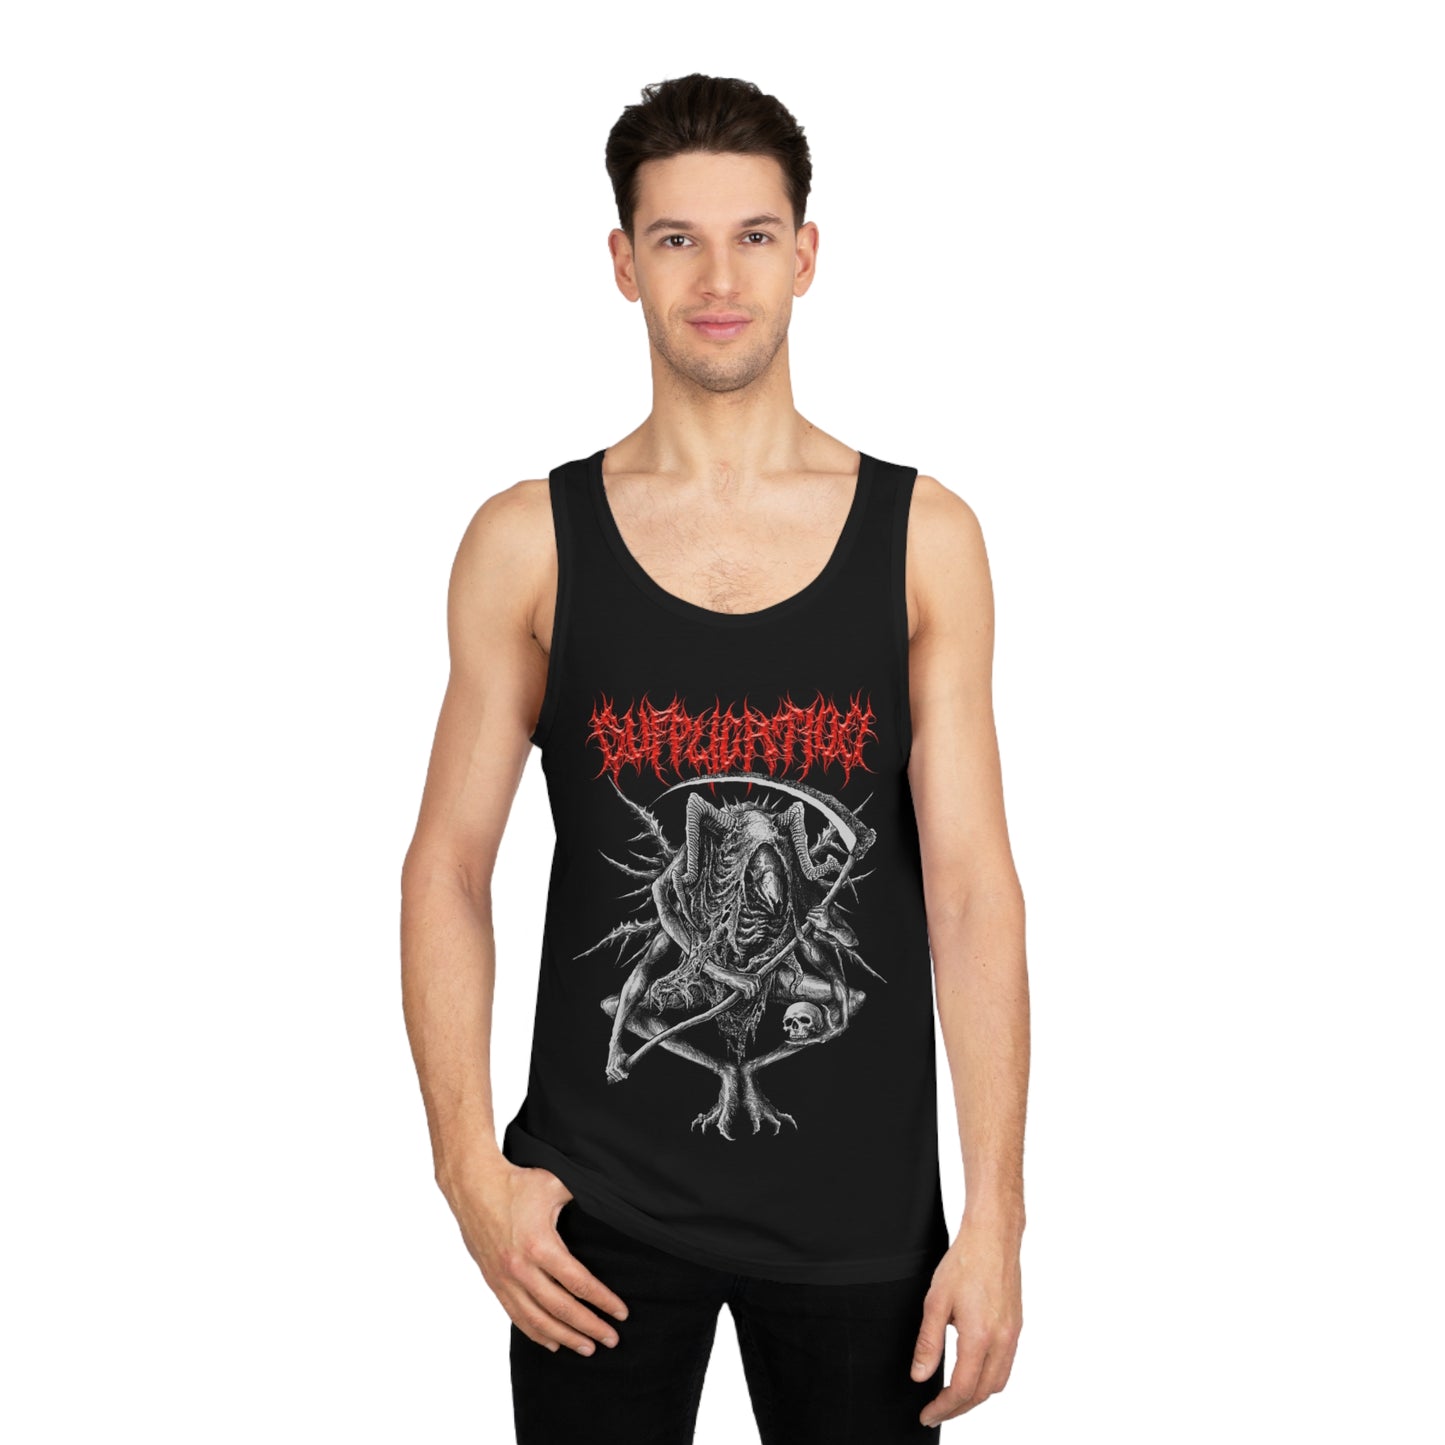 Supplication - Death Comes - Unisex Jersey Tank